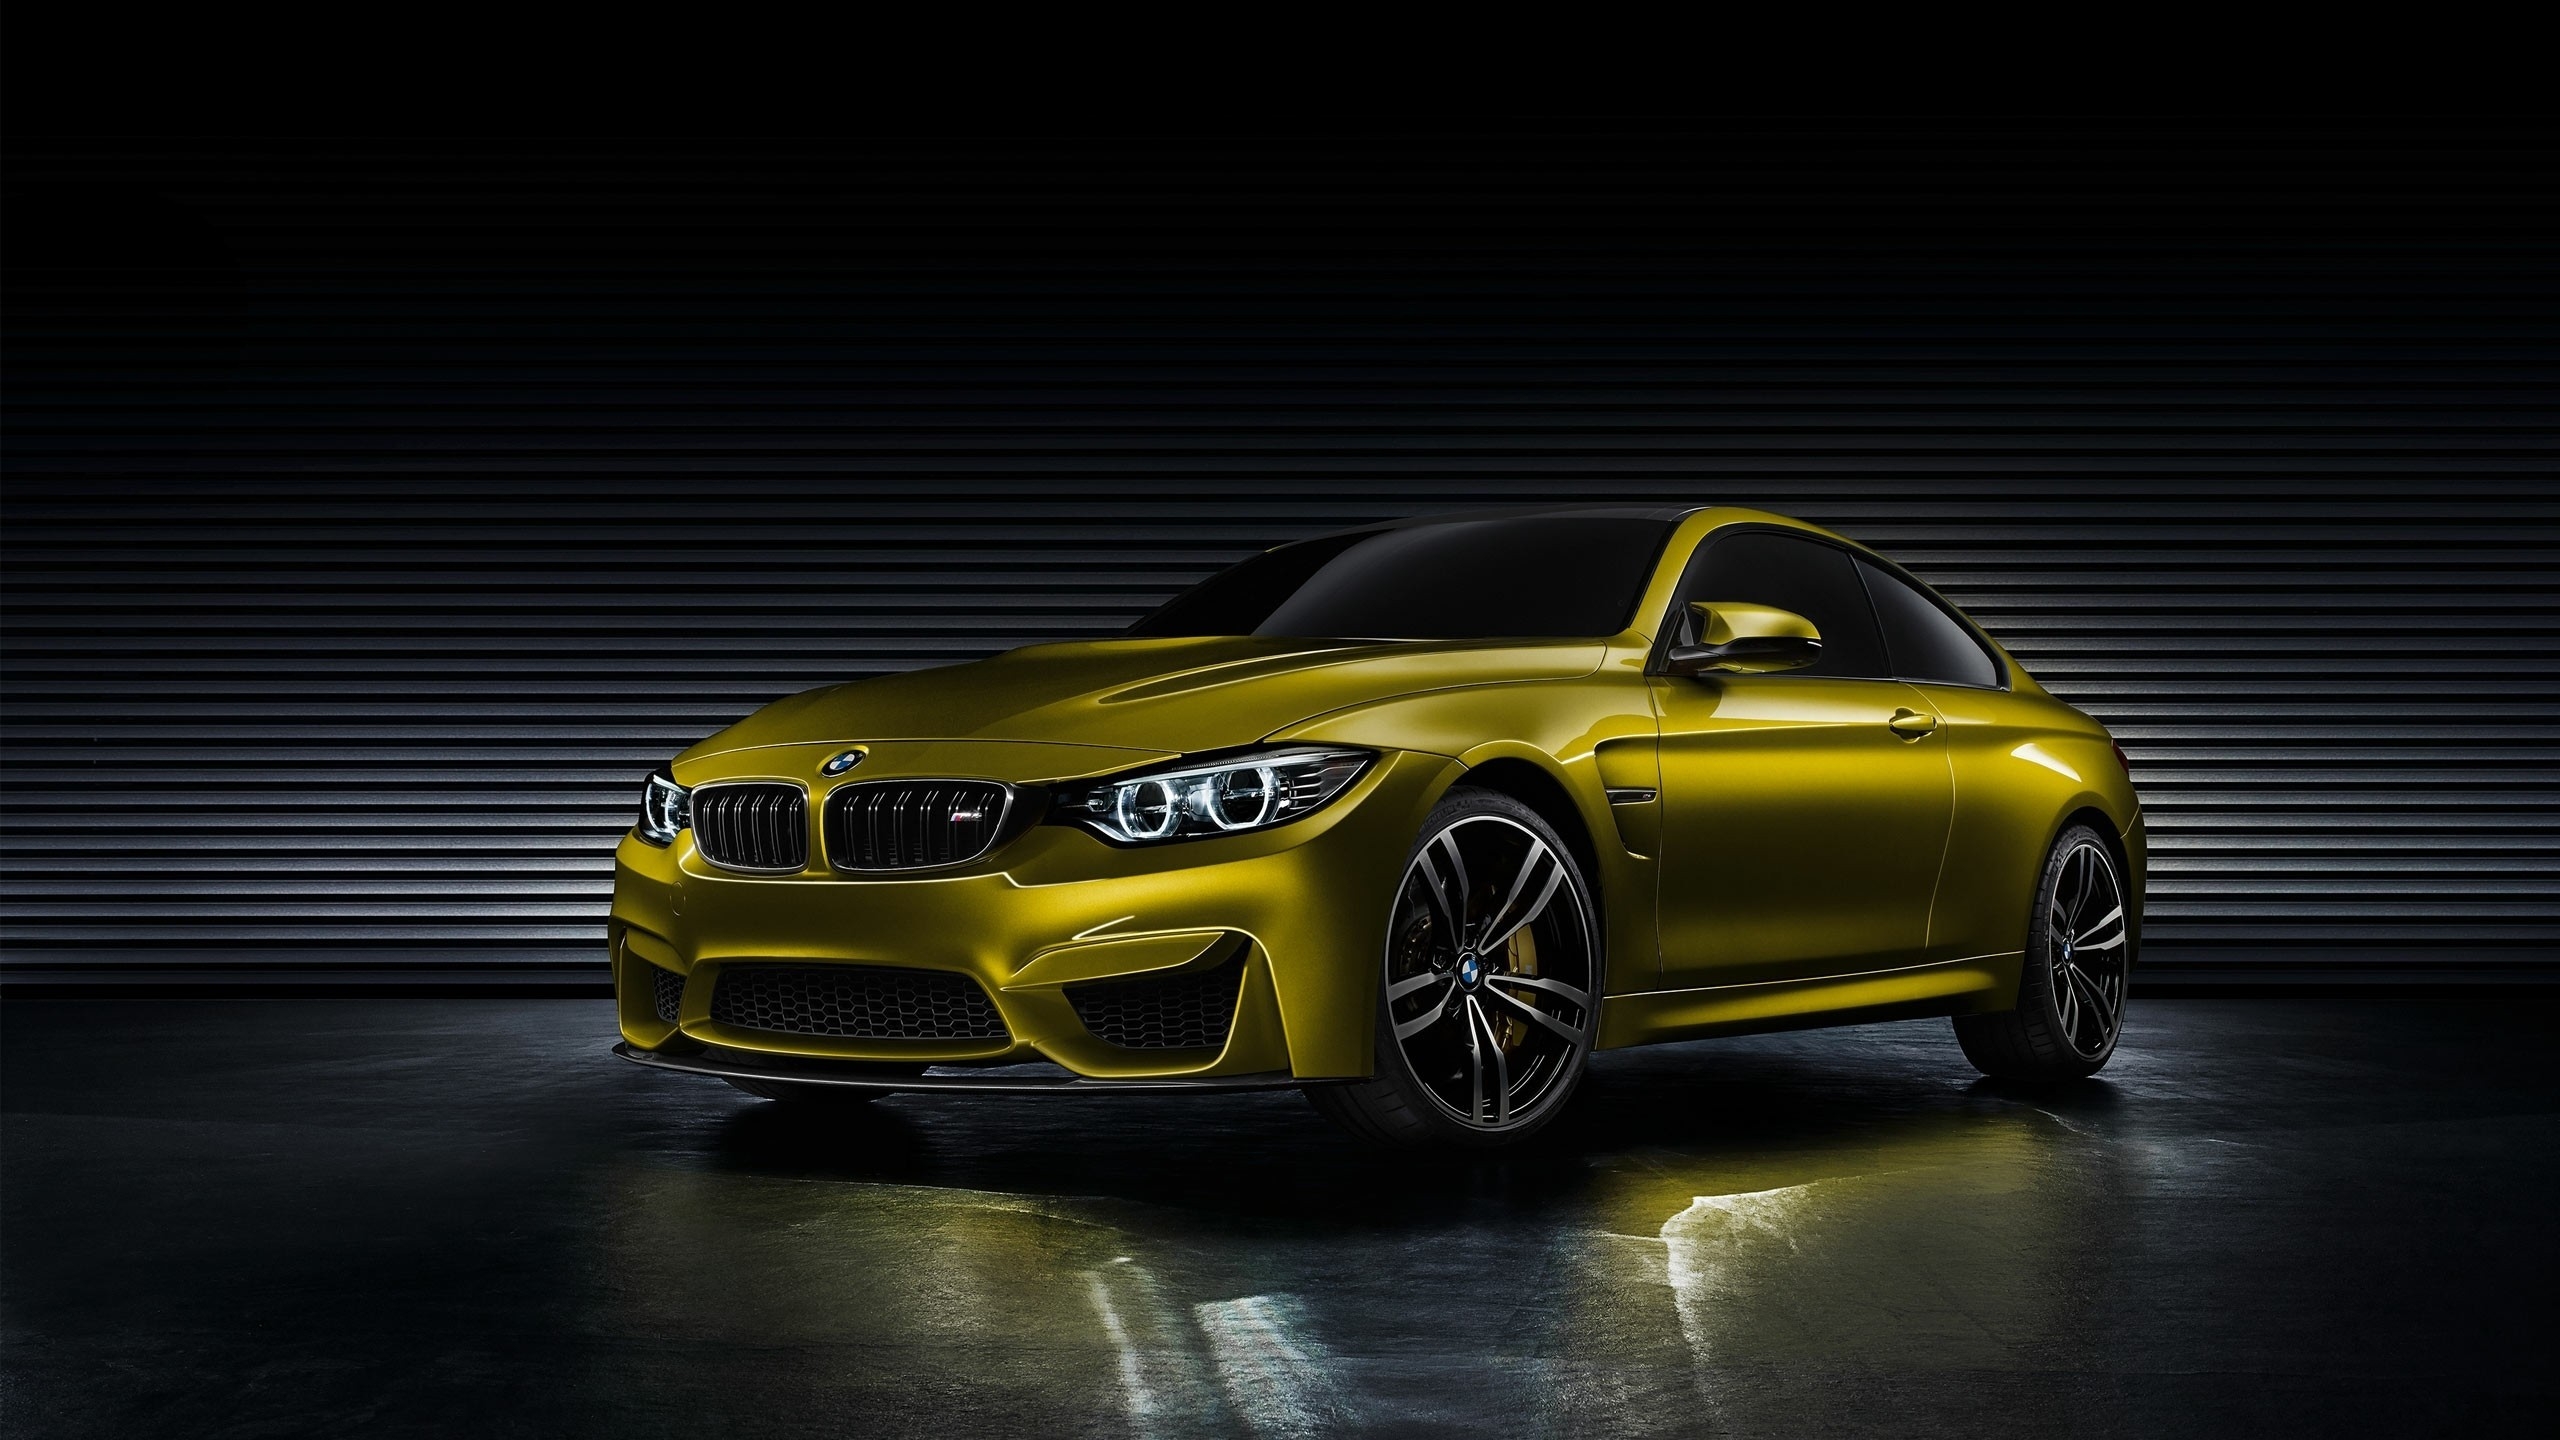 BMW M4 Concept for 2560x1440 HDTV resolution